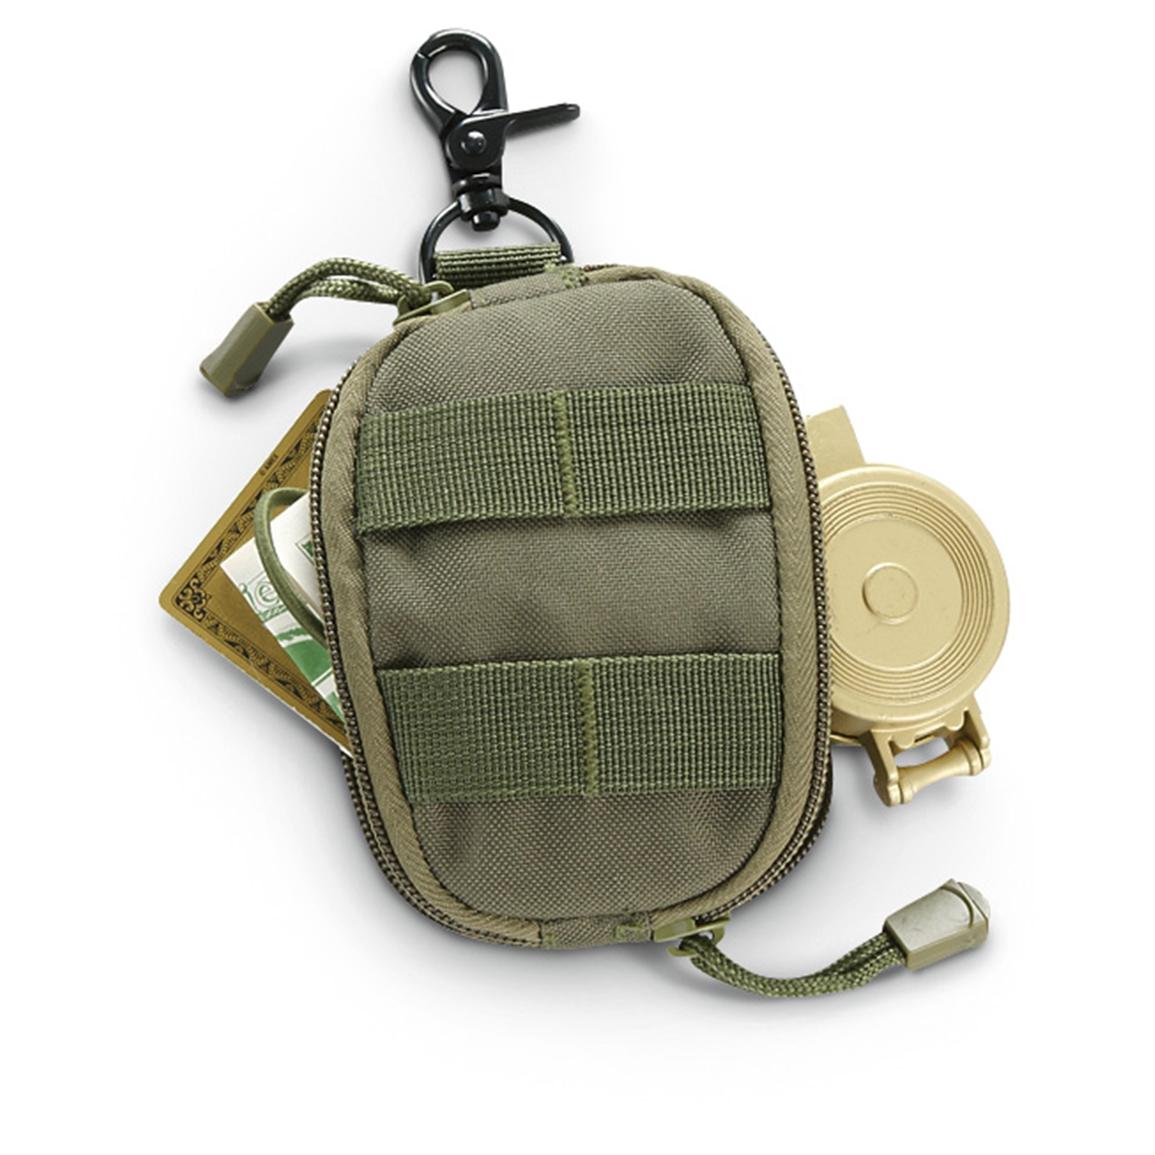 Fox Tactical Clip-on Pouch - 302511, Military Pouches at Sportsman's Guide